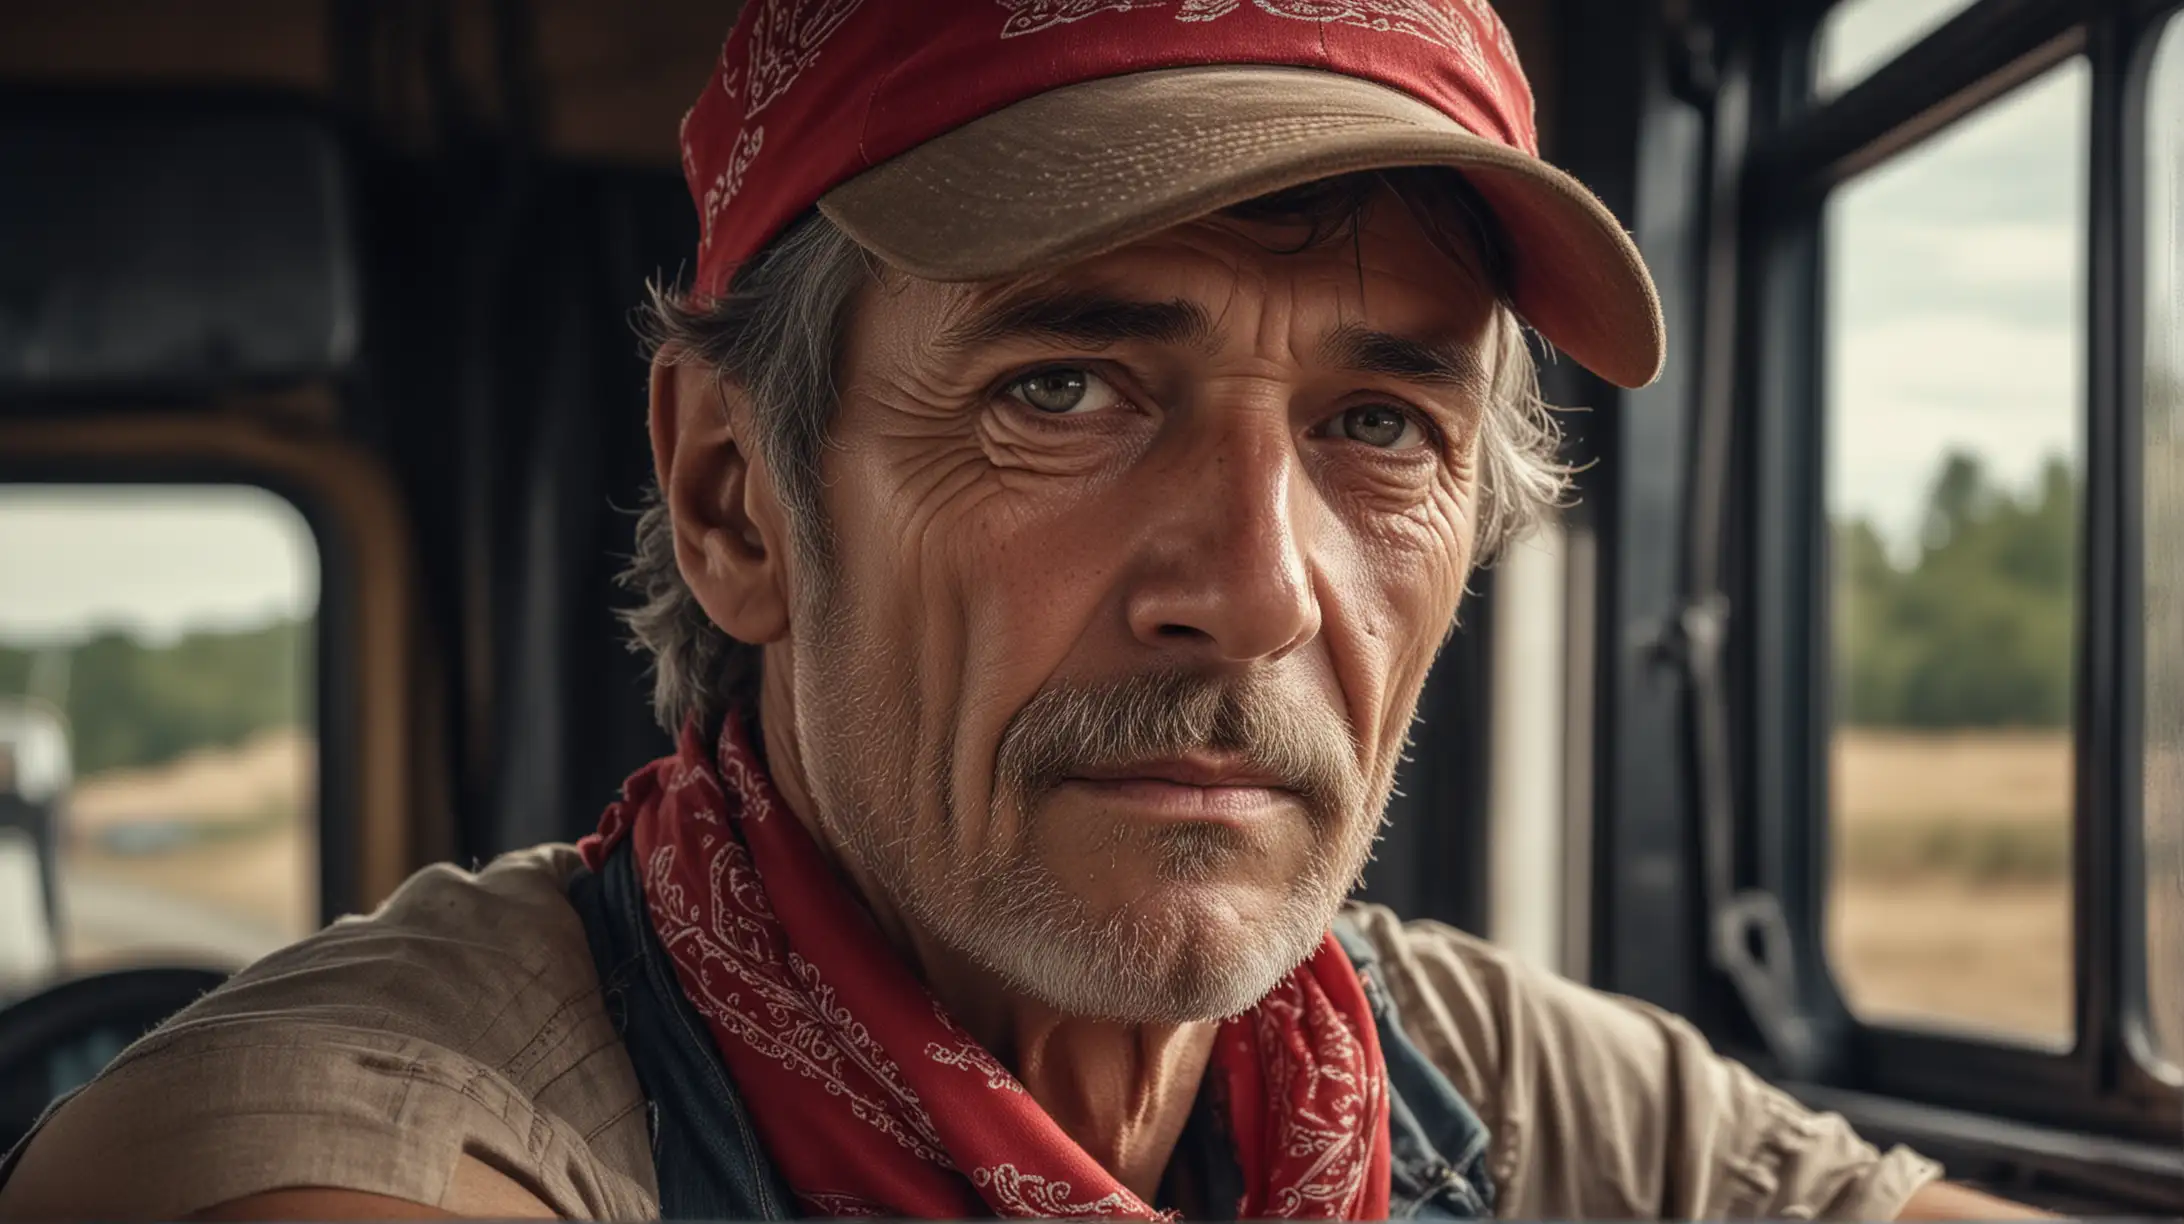 CLASSIC CLOSE UP PORTRAIT PHOTOGRAPHY STYLE, ageing skinny truck driver, EVERYMAN, stubble, red bandana, INSIDE 18-WHEELER CAB, photo realistic, cinematic lighting